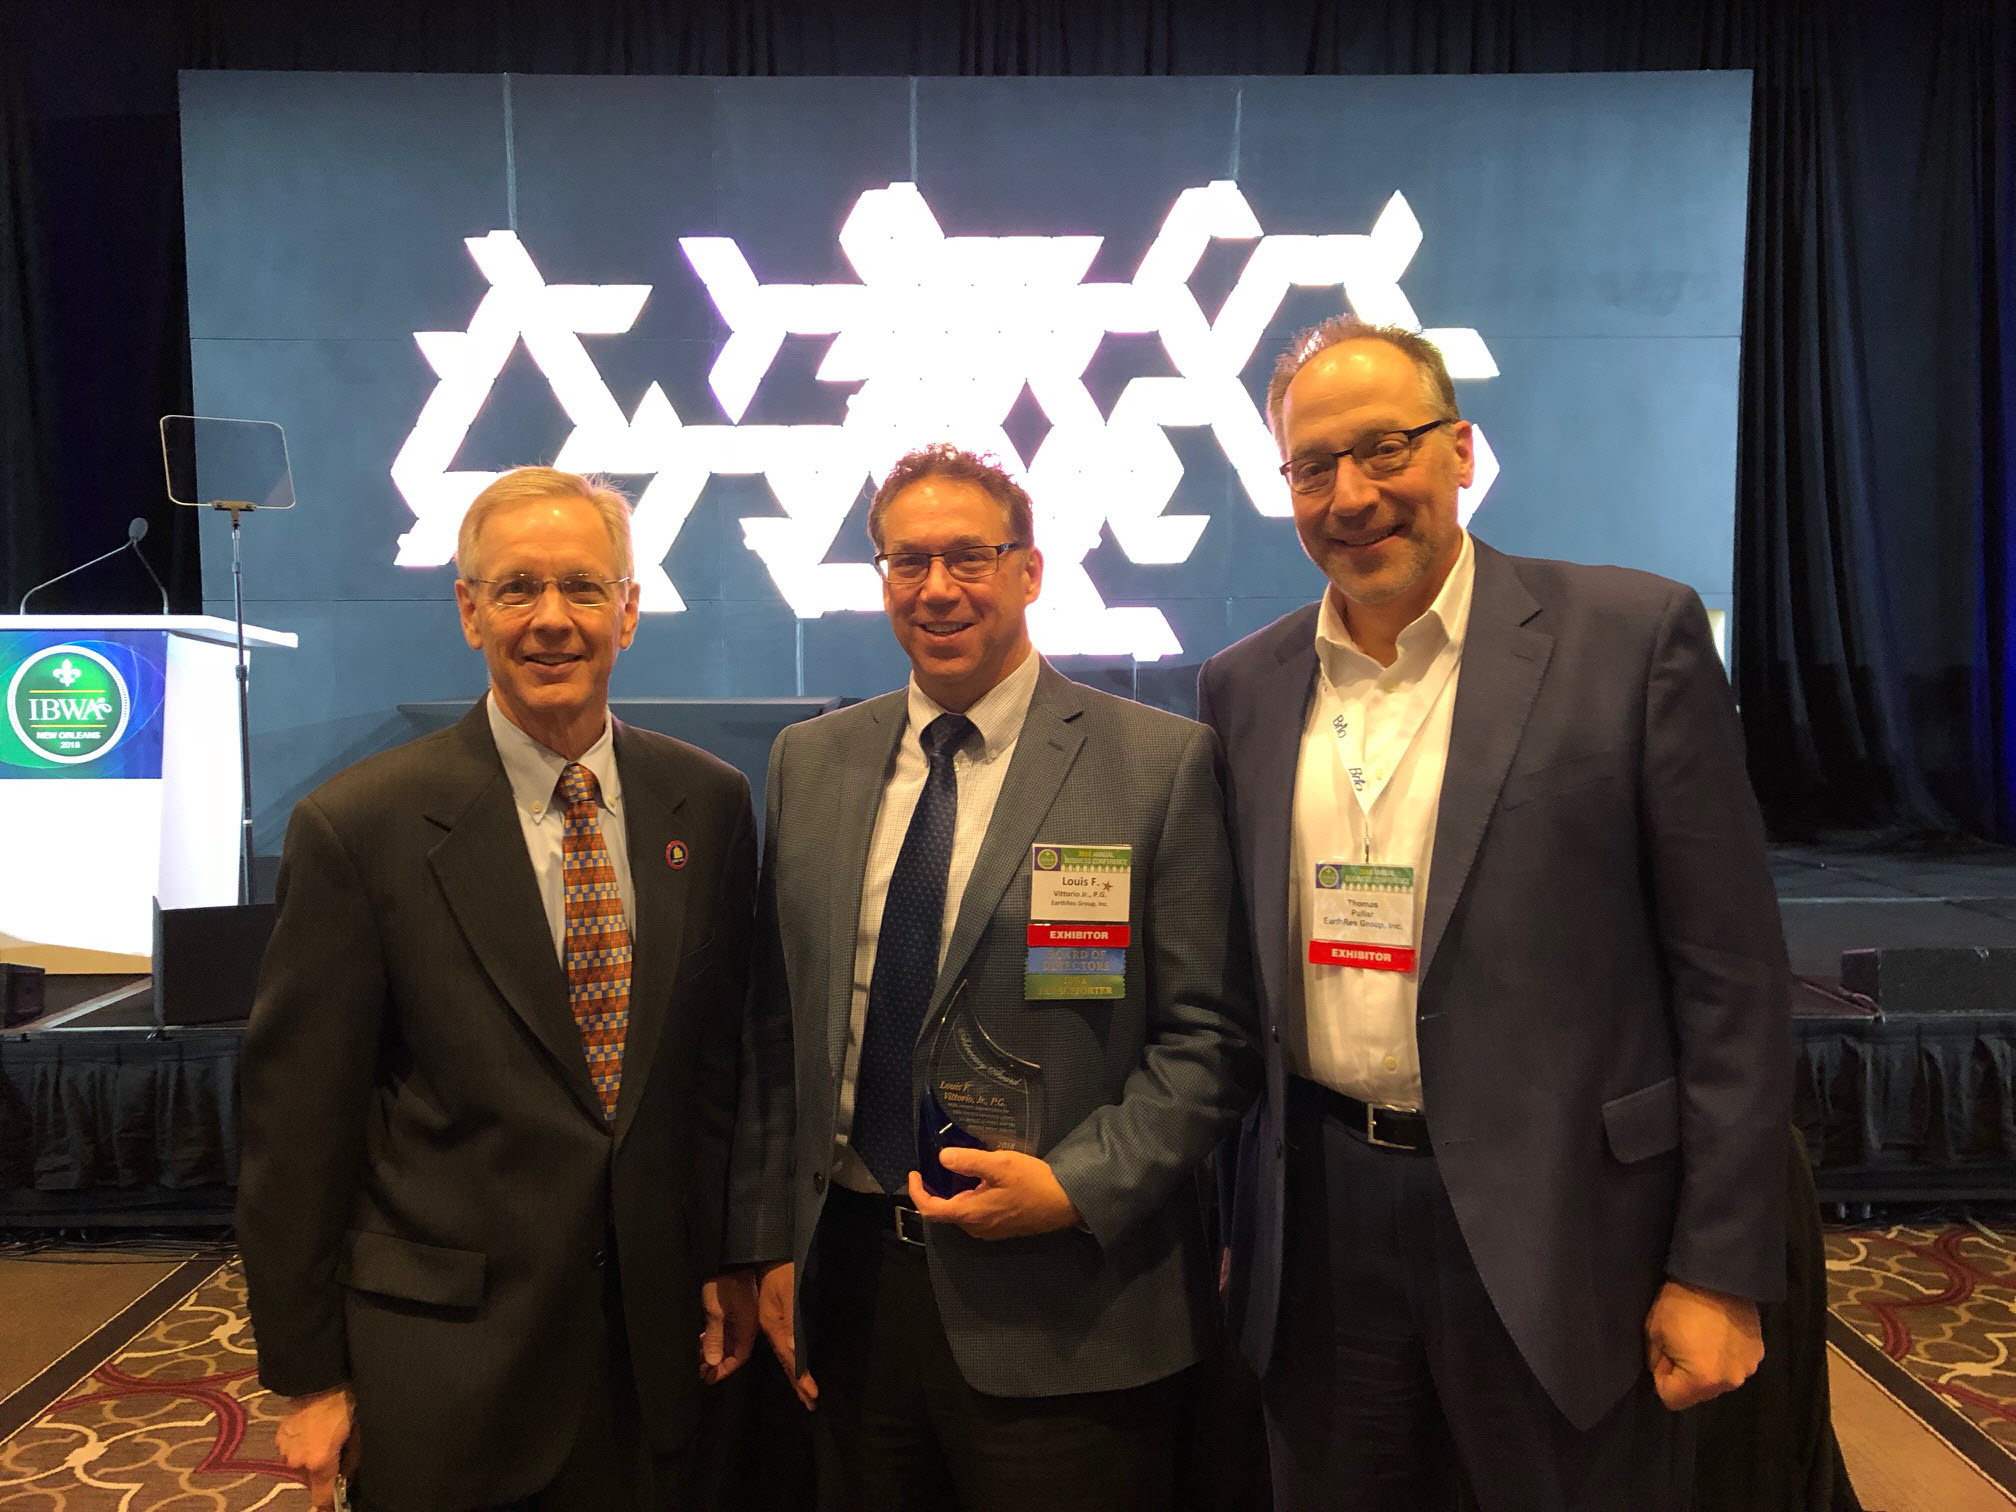 EARTHRES VP Louis Vittorio, Jr. IBWA Advocacy Award Recipient (C) with Joe Doss President of the International Bottled Water Association (L) and Thomas Pullar, Director, Industrial Services, EARTHRES